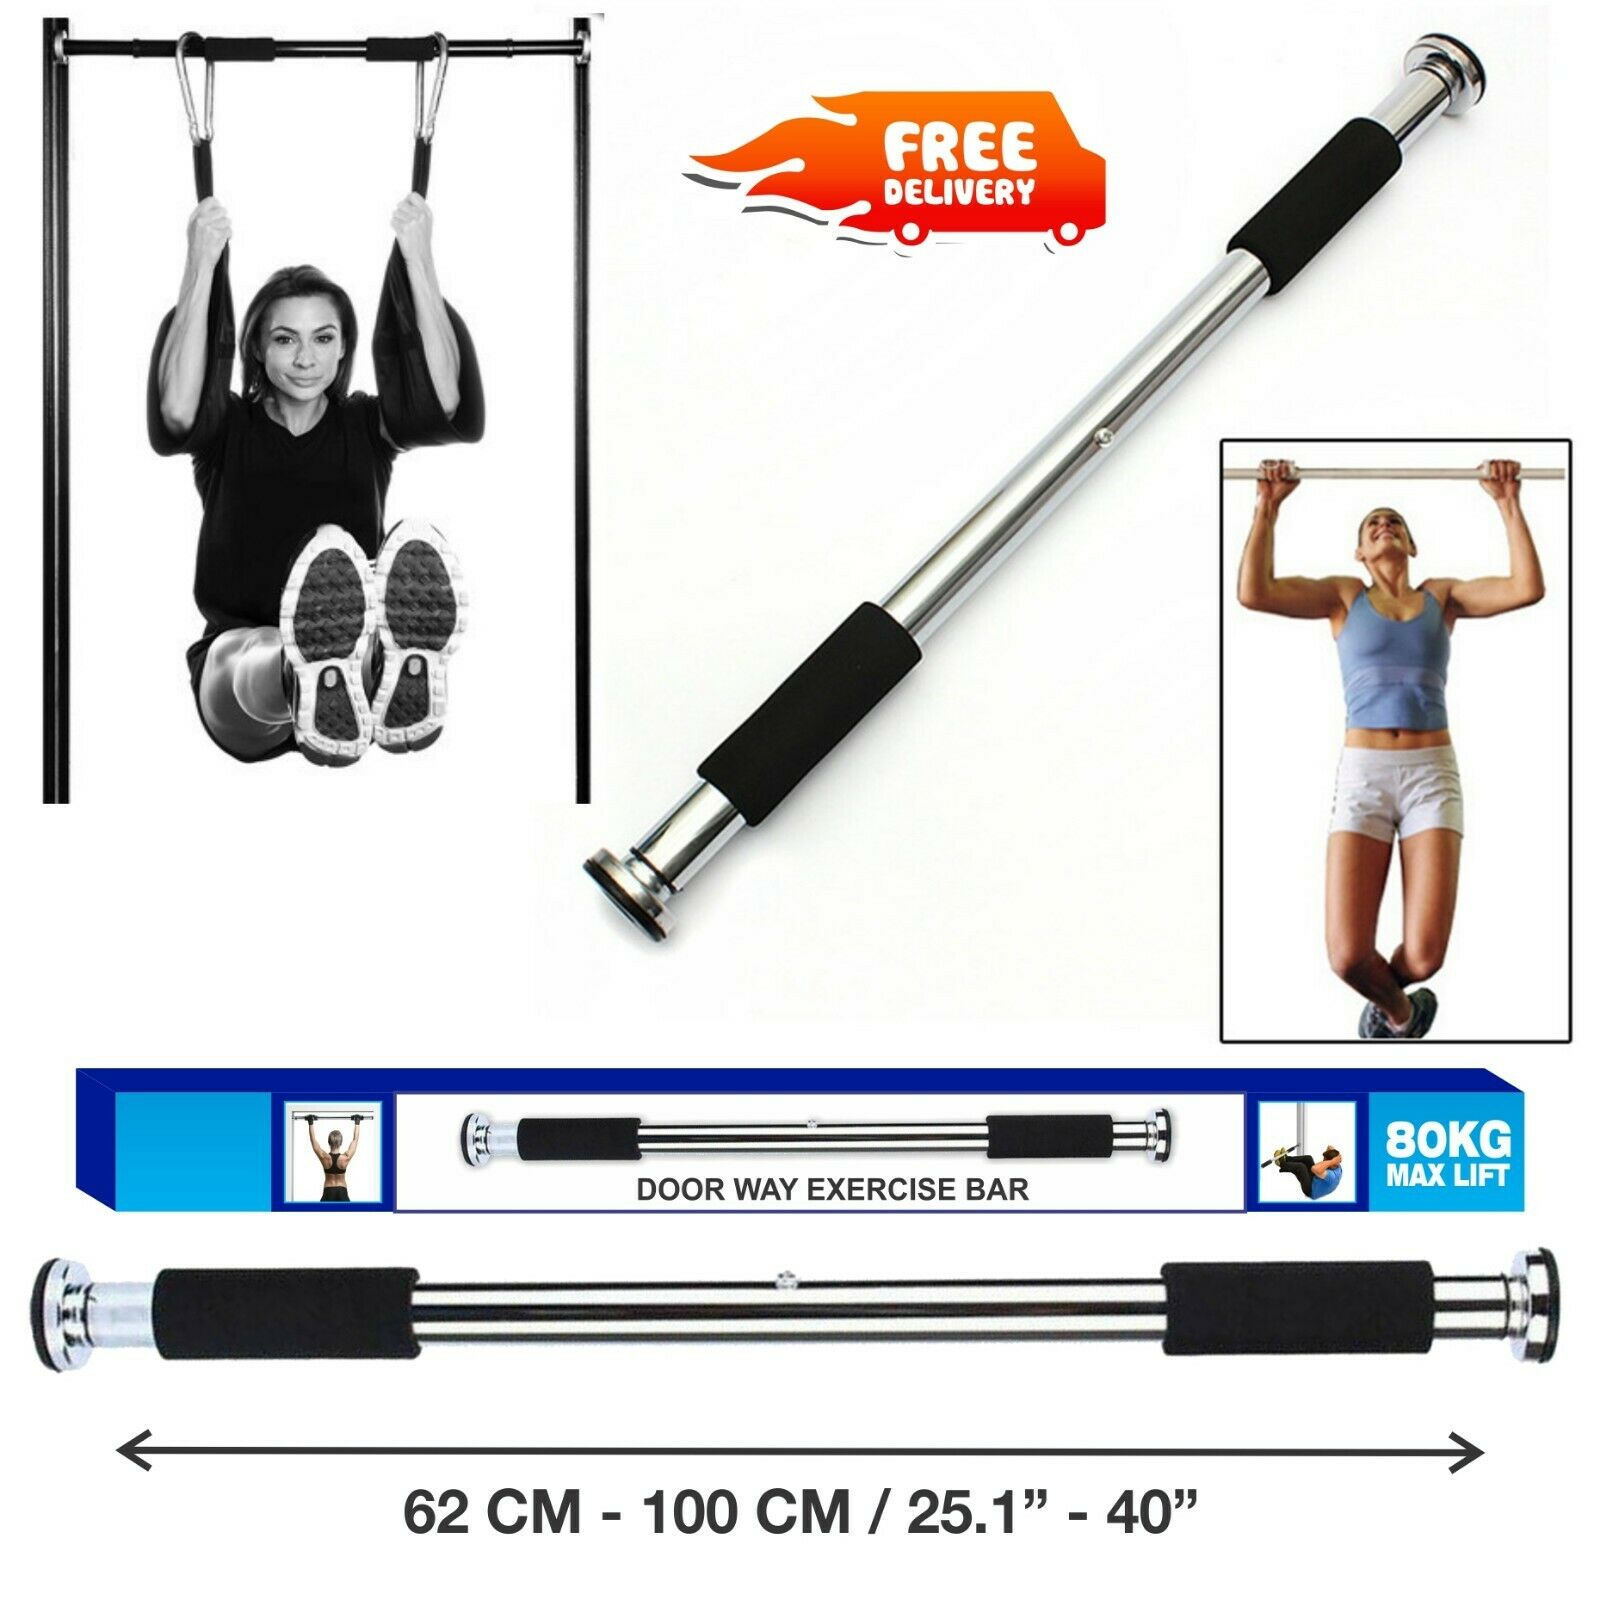 Door Home Exercise Workout Training Gym Bar